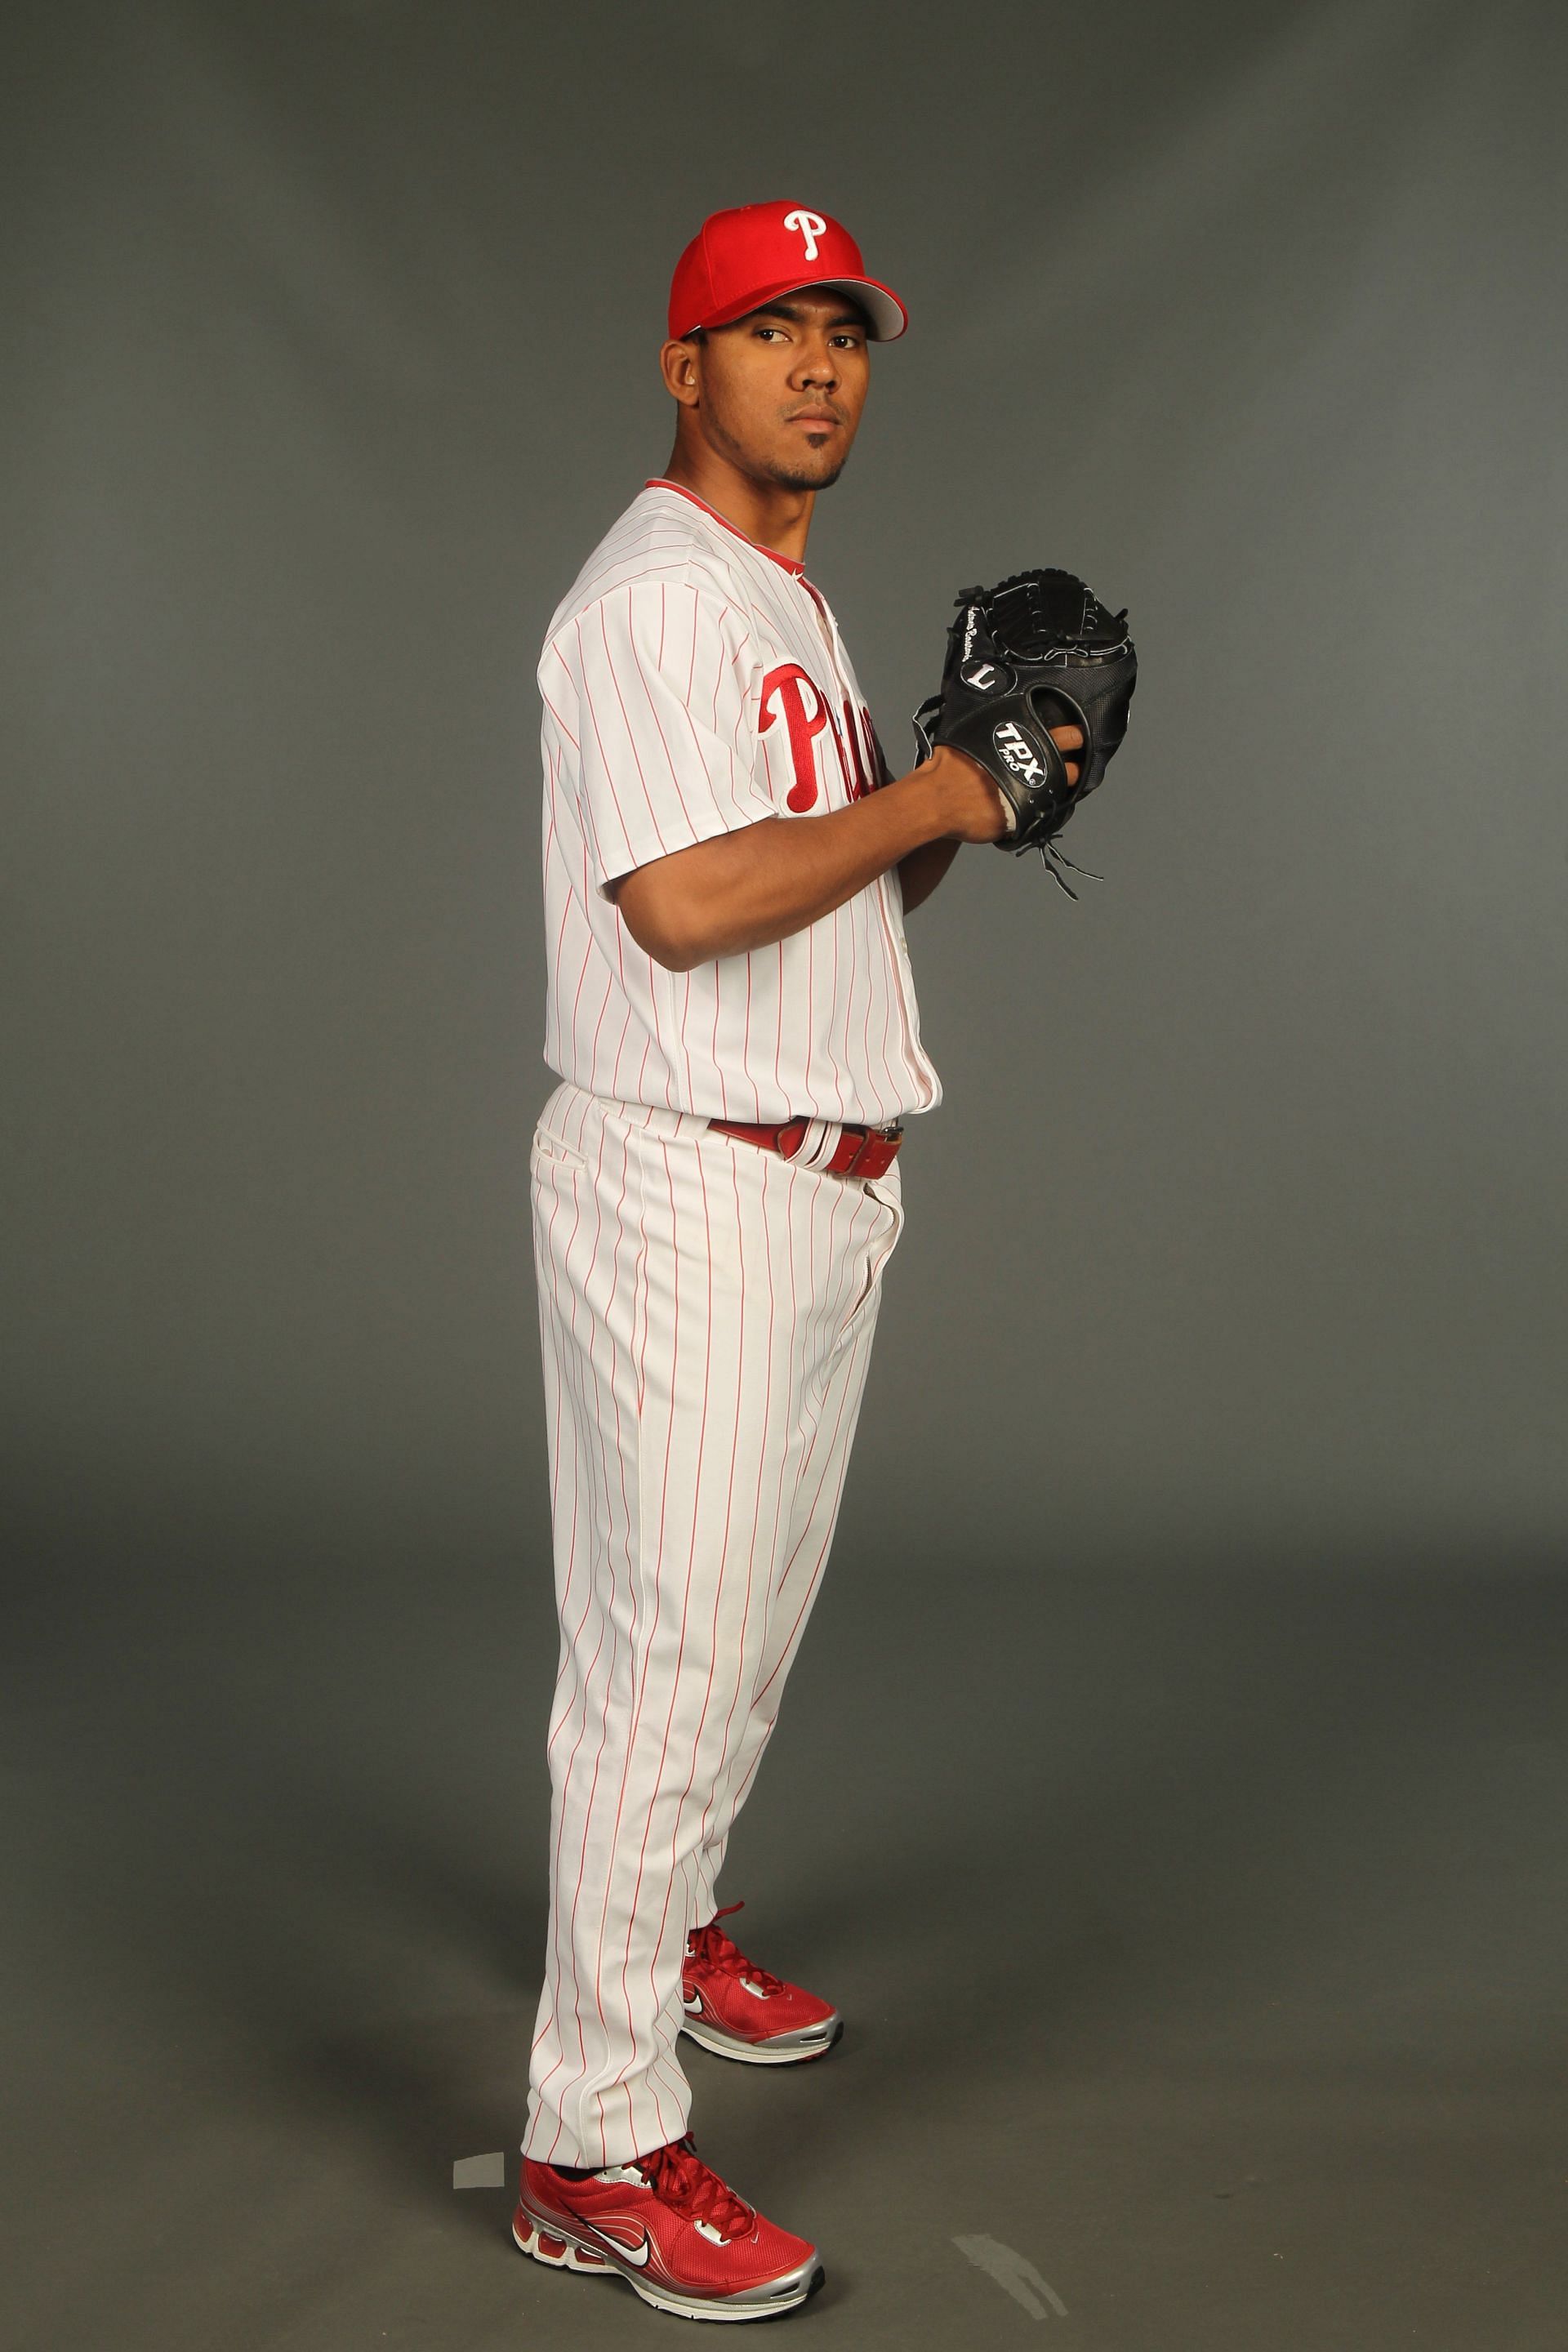 Philadelphia Phillies Photo Day CLEARWATER, FL - FEBRUARY 24: Antonio Bastardo #58 of the Philadelphia Phillies poses for a photo during Spring Training Media Photo Day at Bright House Networks Field on February 24, 2010 in Clearwater, Florida. (Photo by Nick Laham/Getty Images)